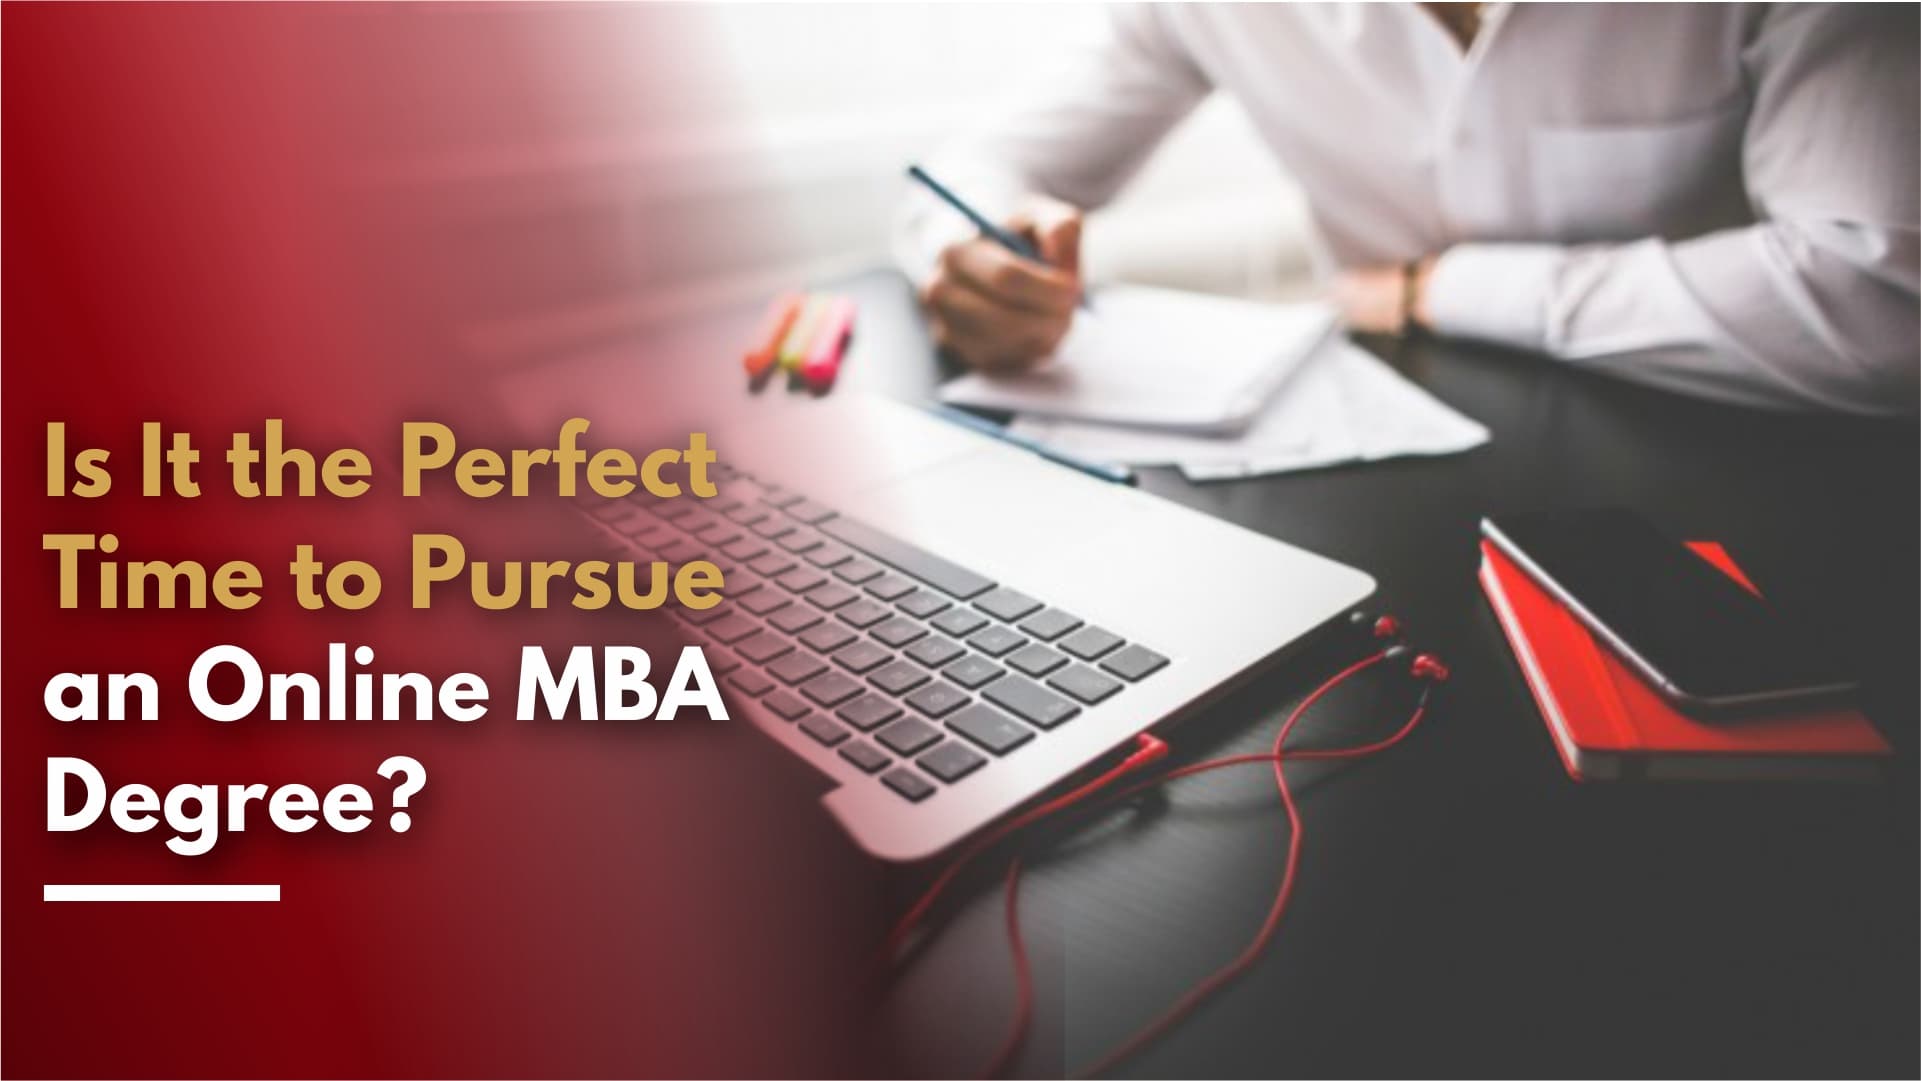 Is It the Perfect Time to Pursue an Online MBA Degree? 